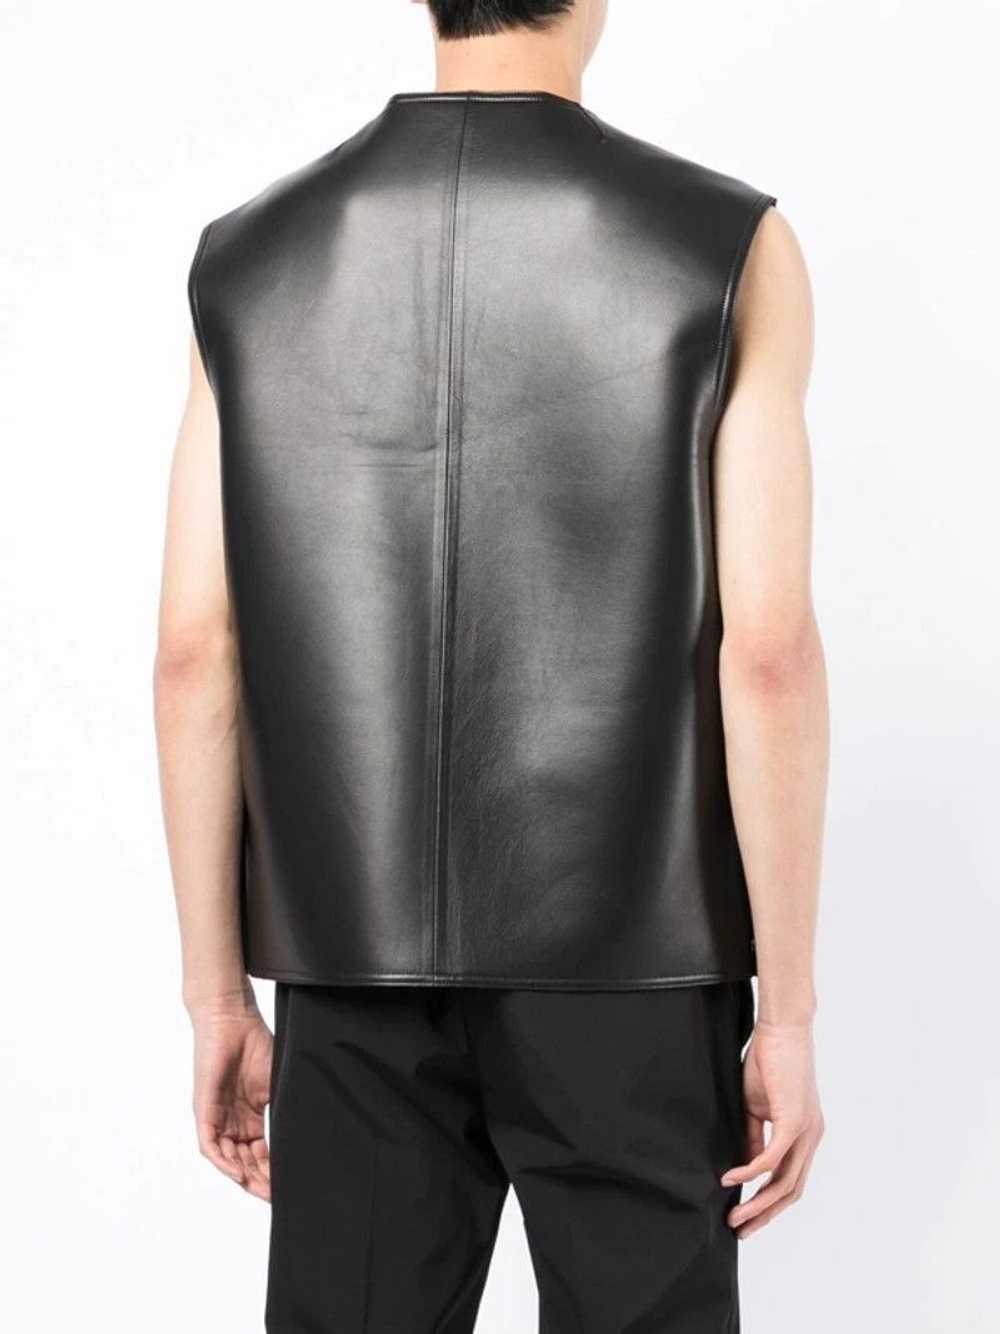 Givenchy Givenchy leather cargo vest - image 12